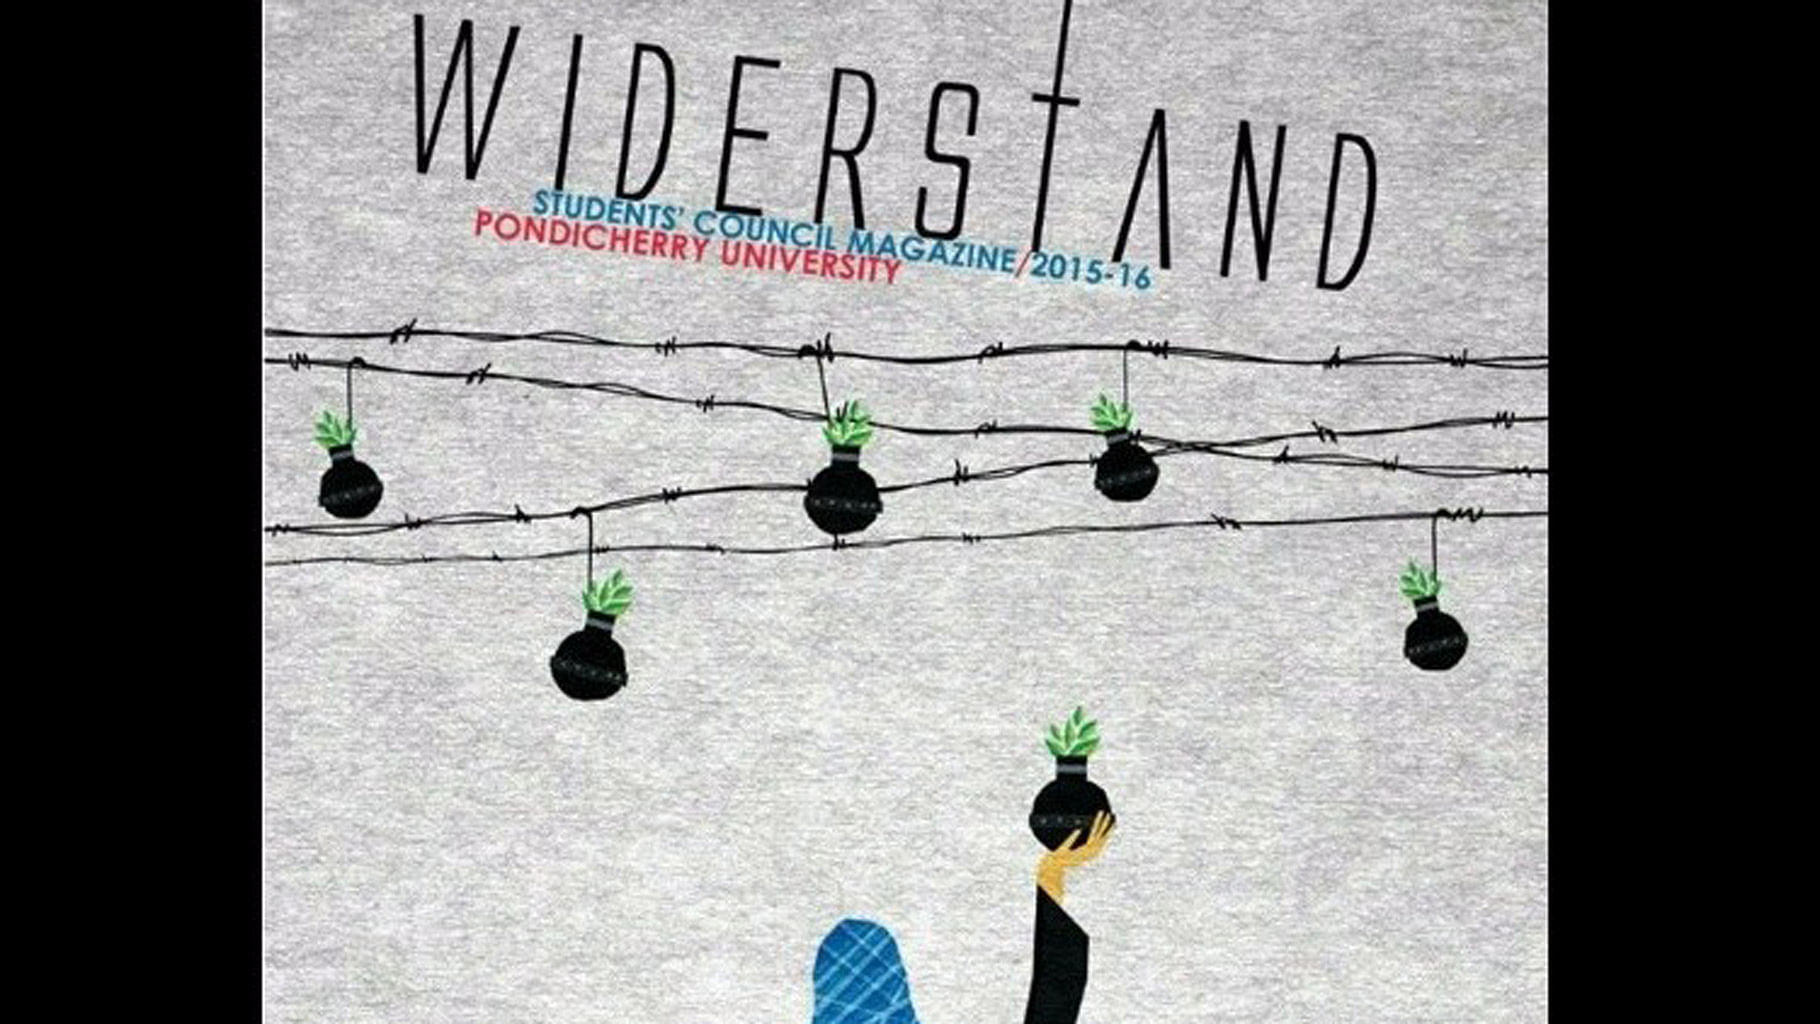 Puducherry University students council’s magazine Widerstand’s cover page. (Photo: The News Minute)